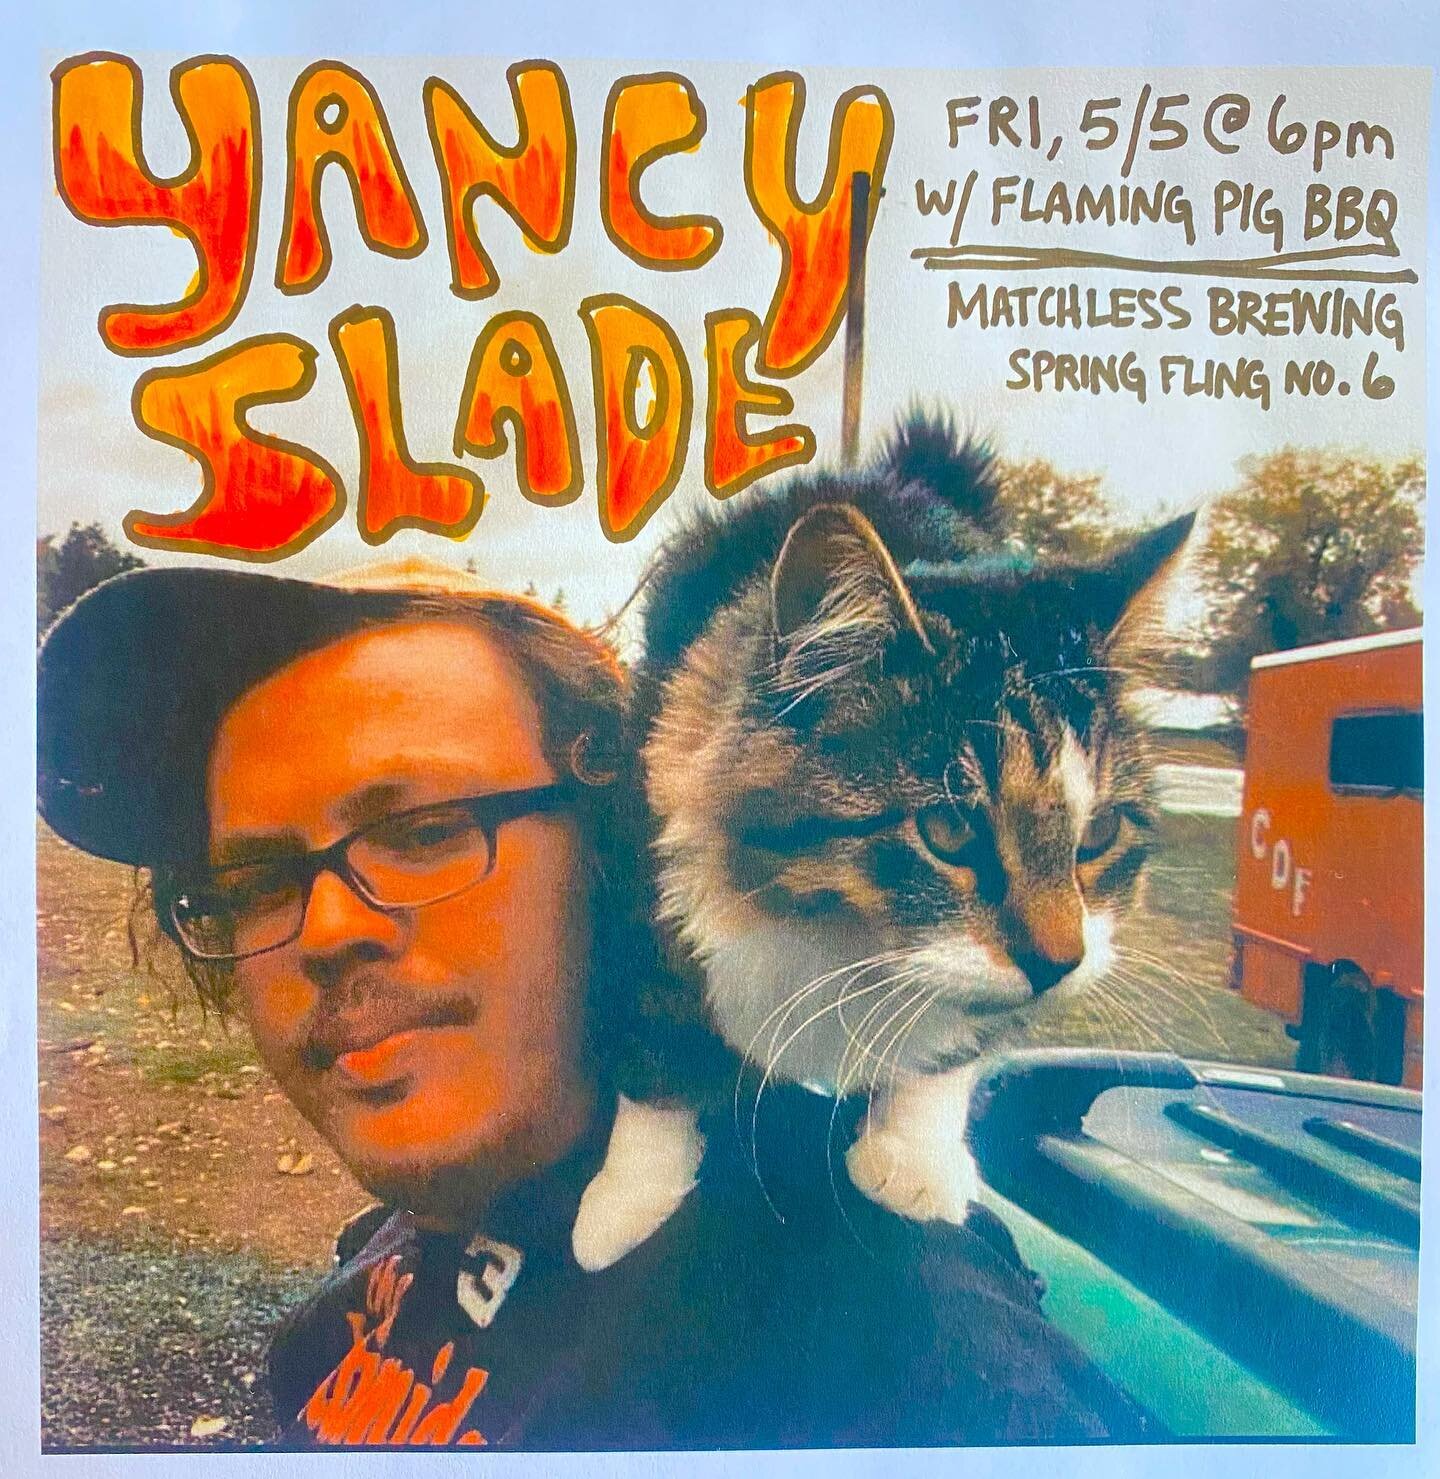 🍺🎶Taproom Spring Fling #6🎶🍗

We are simply STOKED to host the memorable @yanceyslade this Friday, great tunes and delicious bbq from @flamingpigbbq as usual, every Friday at Matchless 🤠 yeehaw! 🍻

#pnwmusic #pnwbeer #pnwbbq #beerandashow #goodt